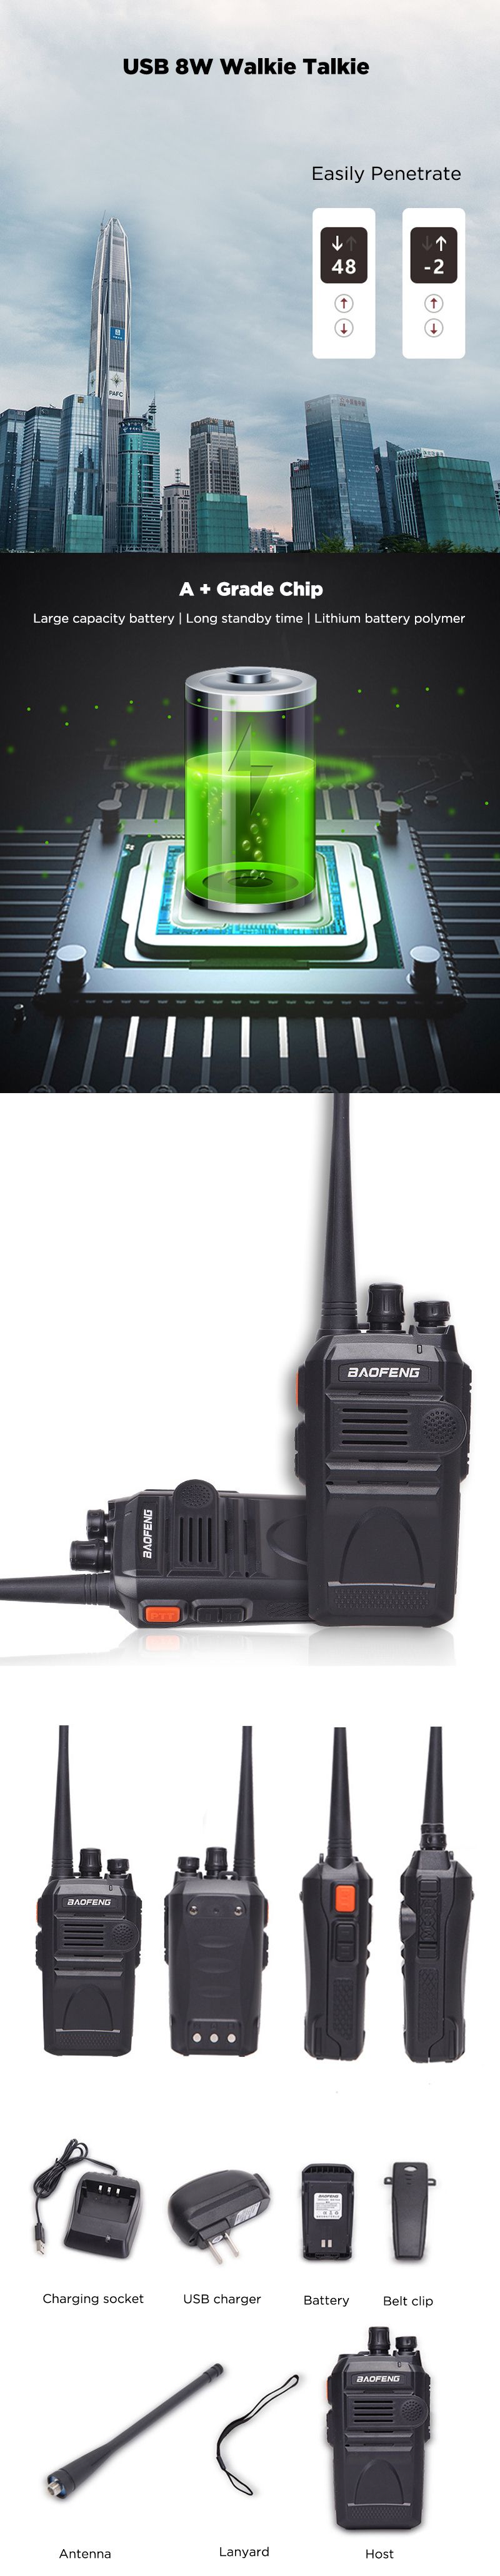 BAOFENG-BF-999S5-8W-Large-Power-Handheld-Walkie-Talkie-16-Channels-400-470MHz-Mini-Ultra-Thin-Interp-1617308